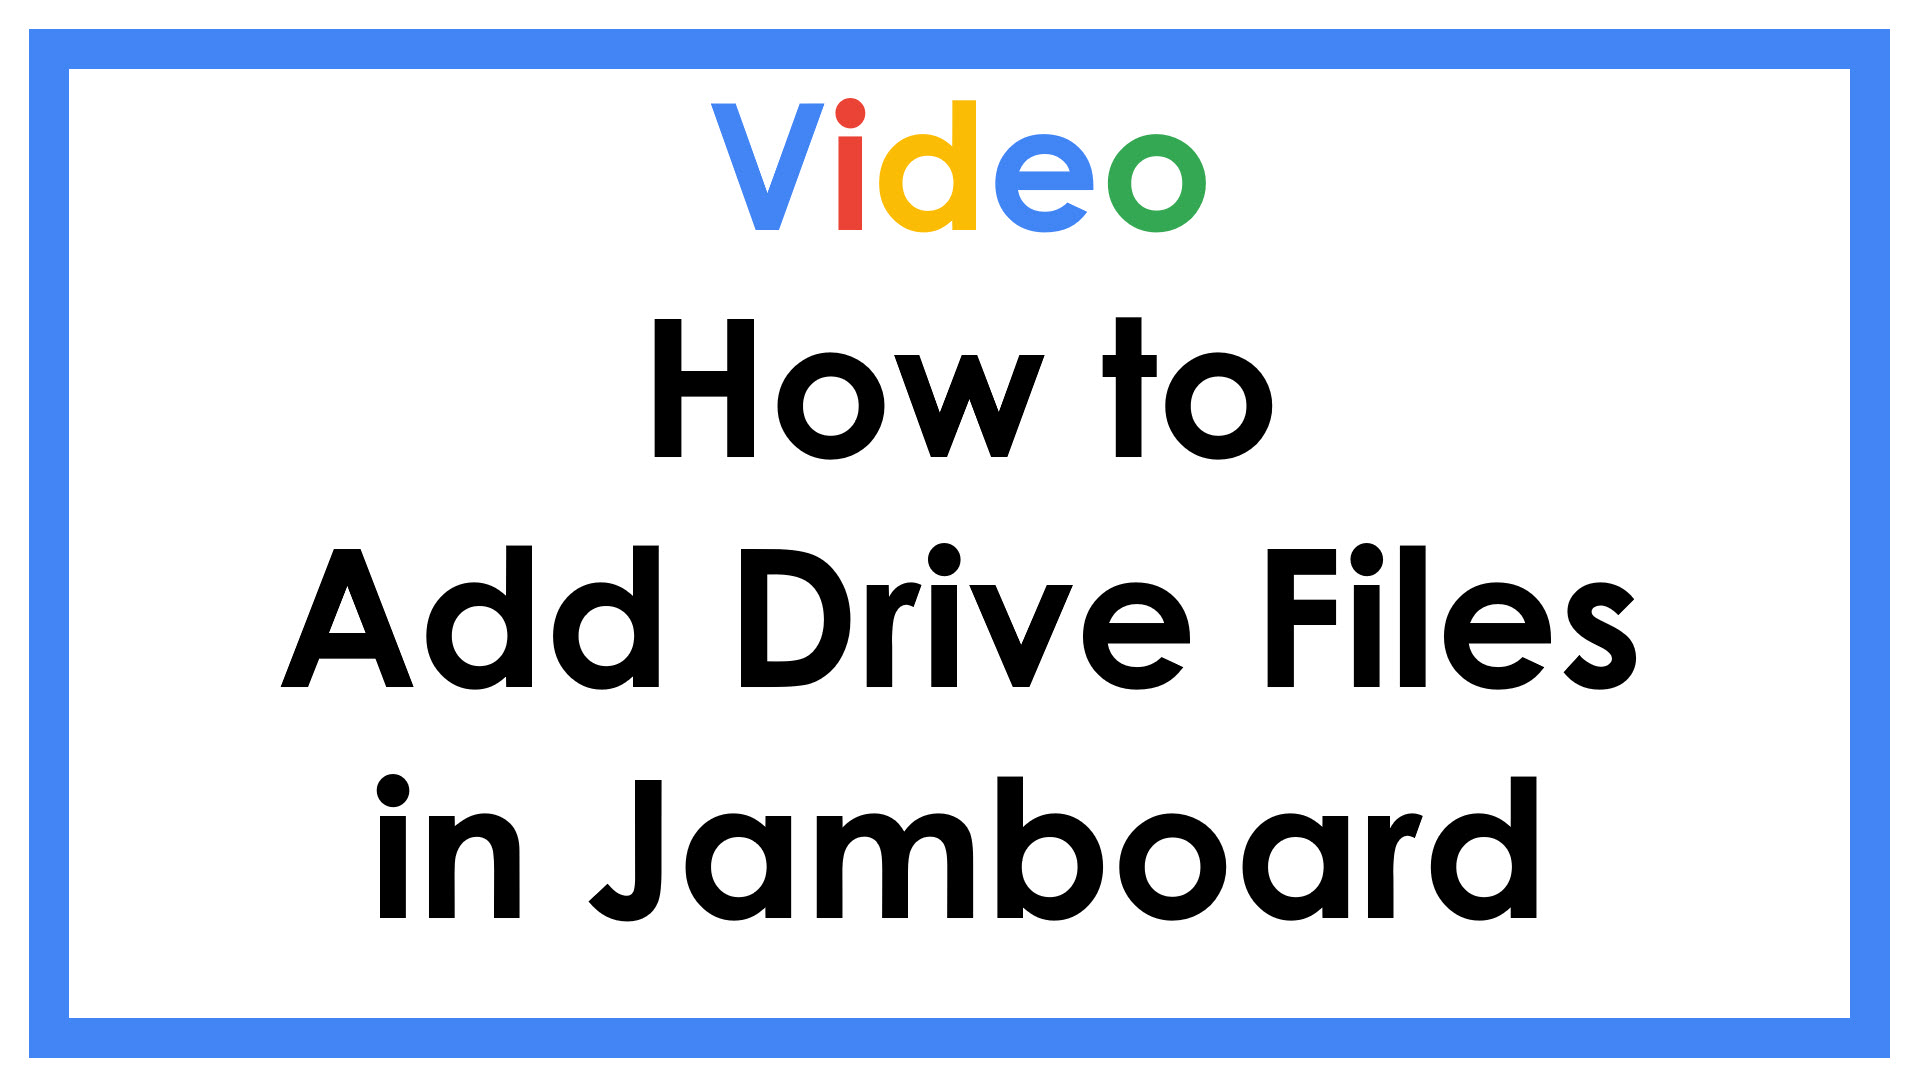 How to Add Drive Files in Jamboard